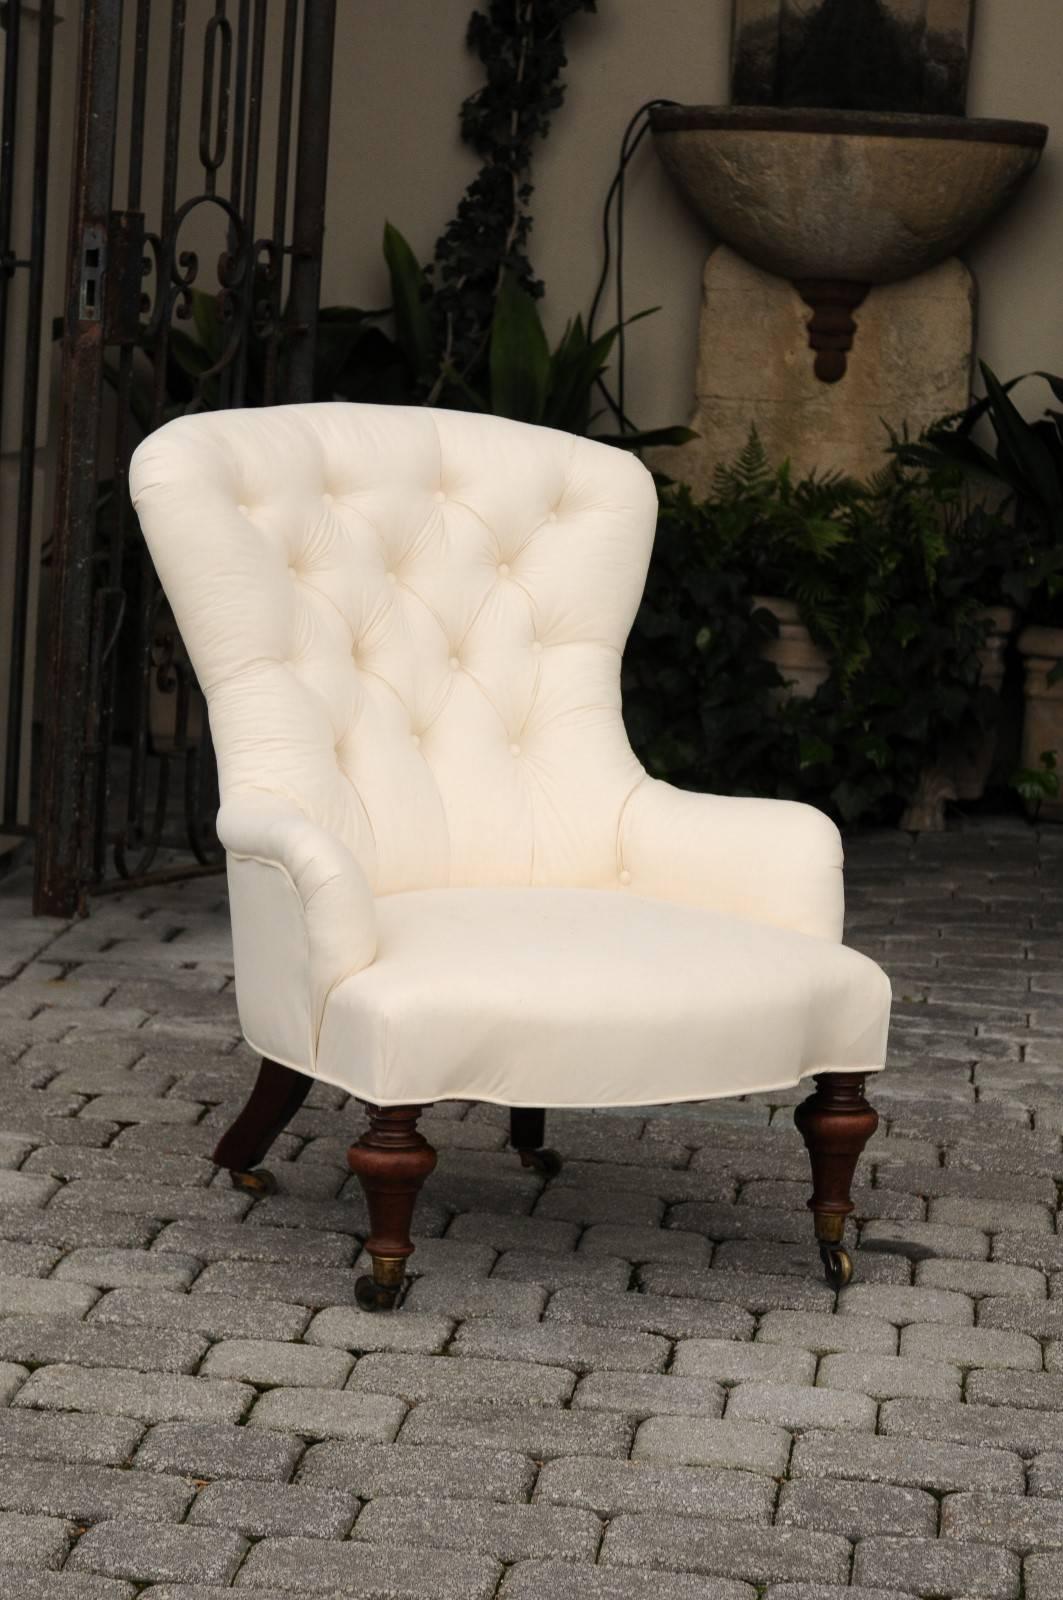 This English slipper chair from the late 19th century features a tufted upholstered back with an upholstered seat and outswept arms. This fanback chair is perfect for welcoming the sitter comfortably. The chair is raised on four William IV style